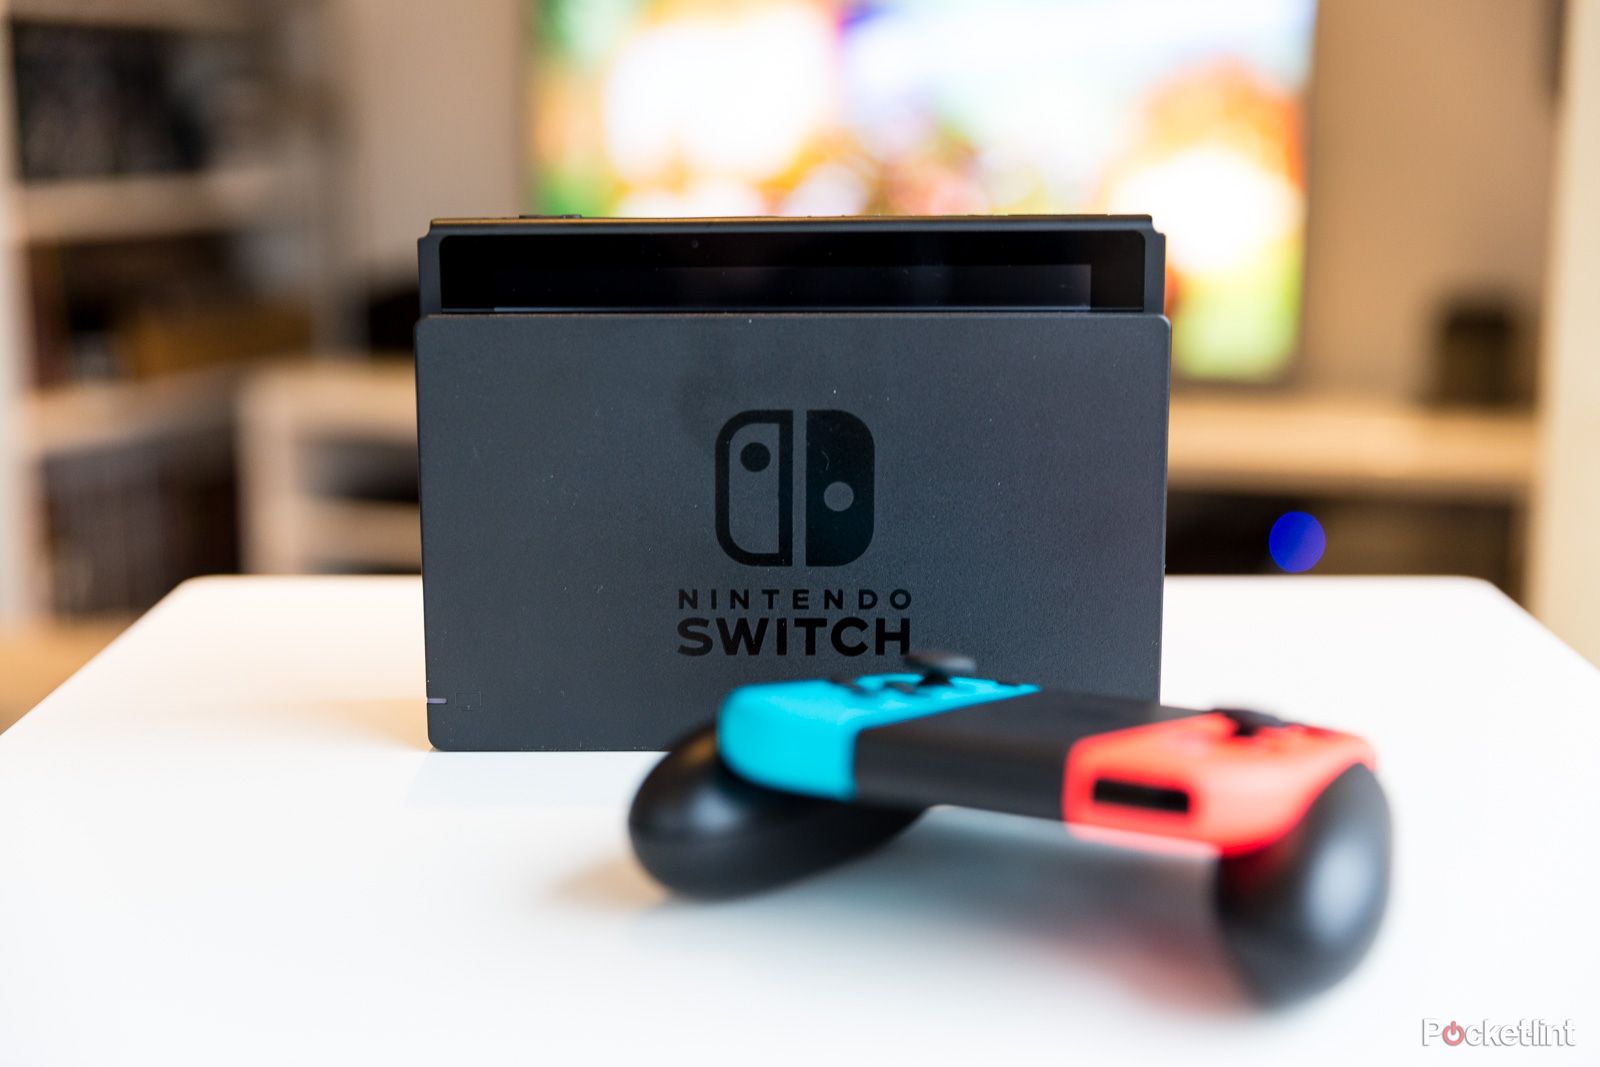 Four things you should get for your Nintendo Switch before it